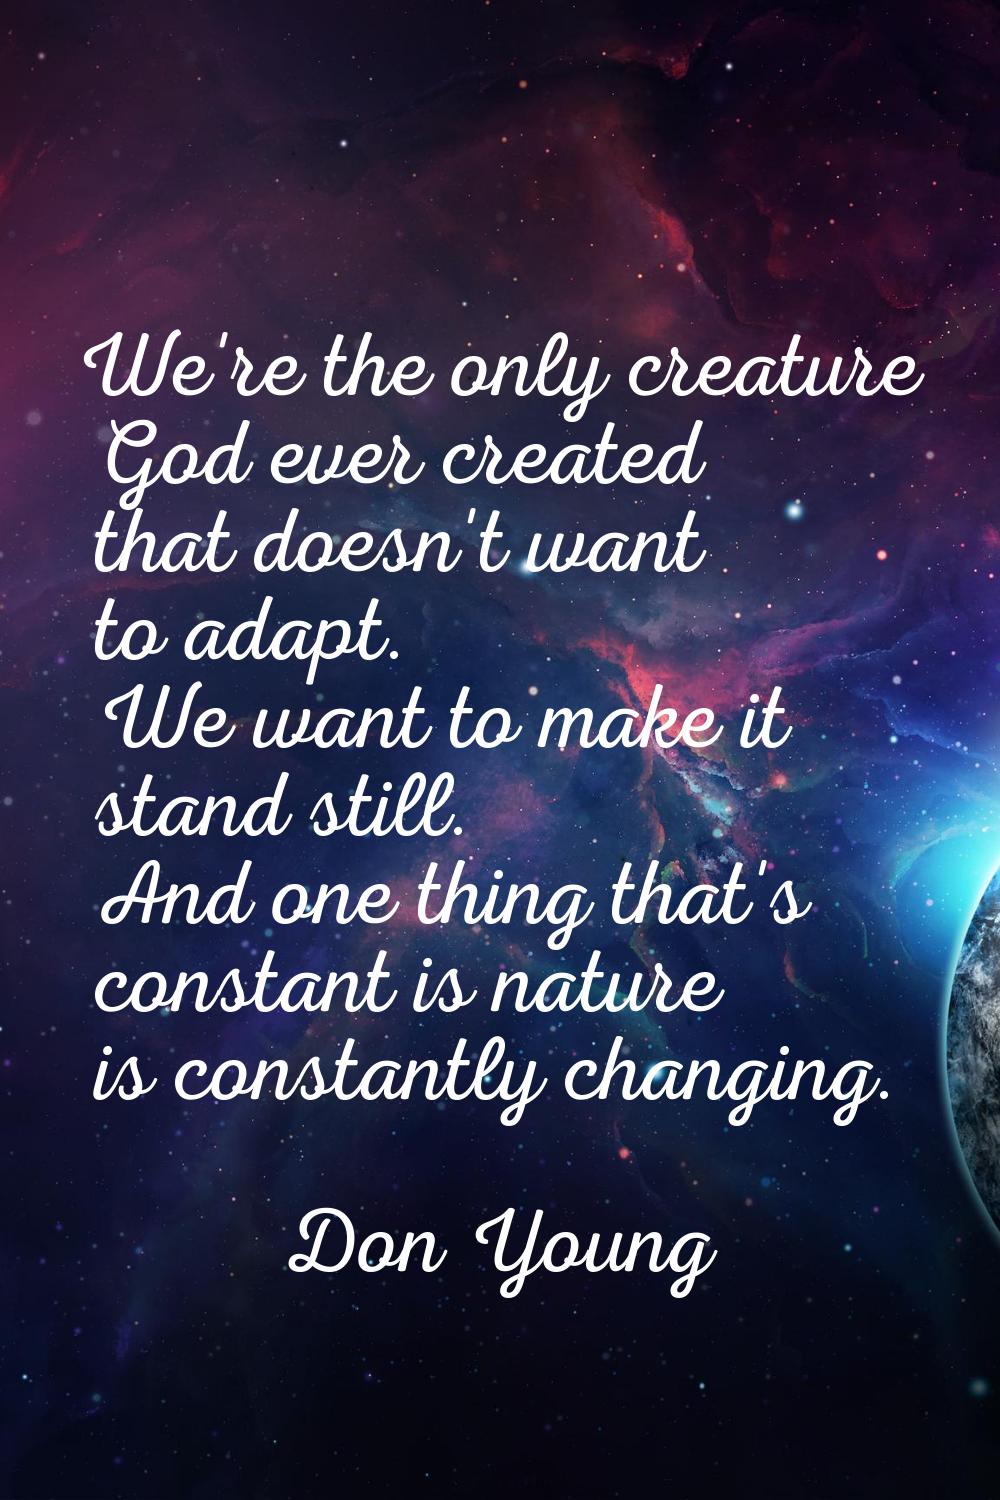 We're the only creature God ever created that doesn't want to adapt. We want to make it stand still